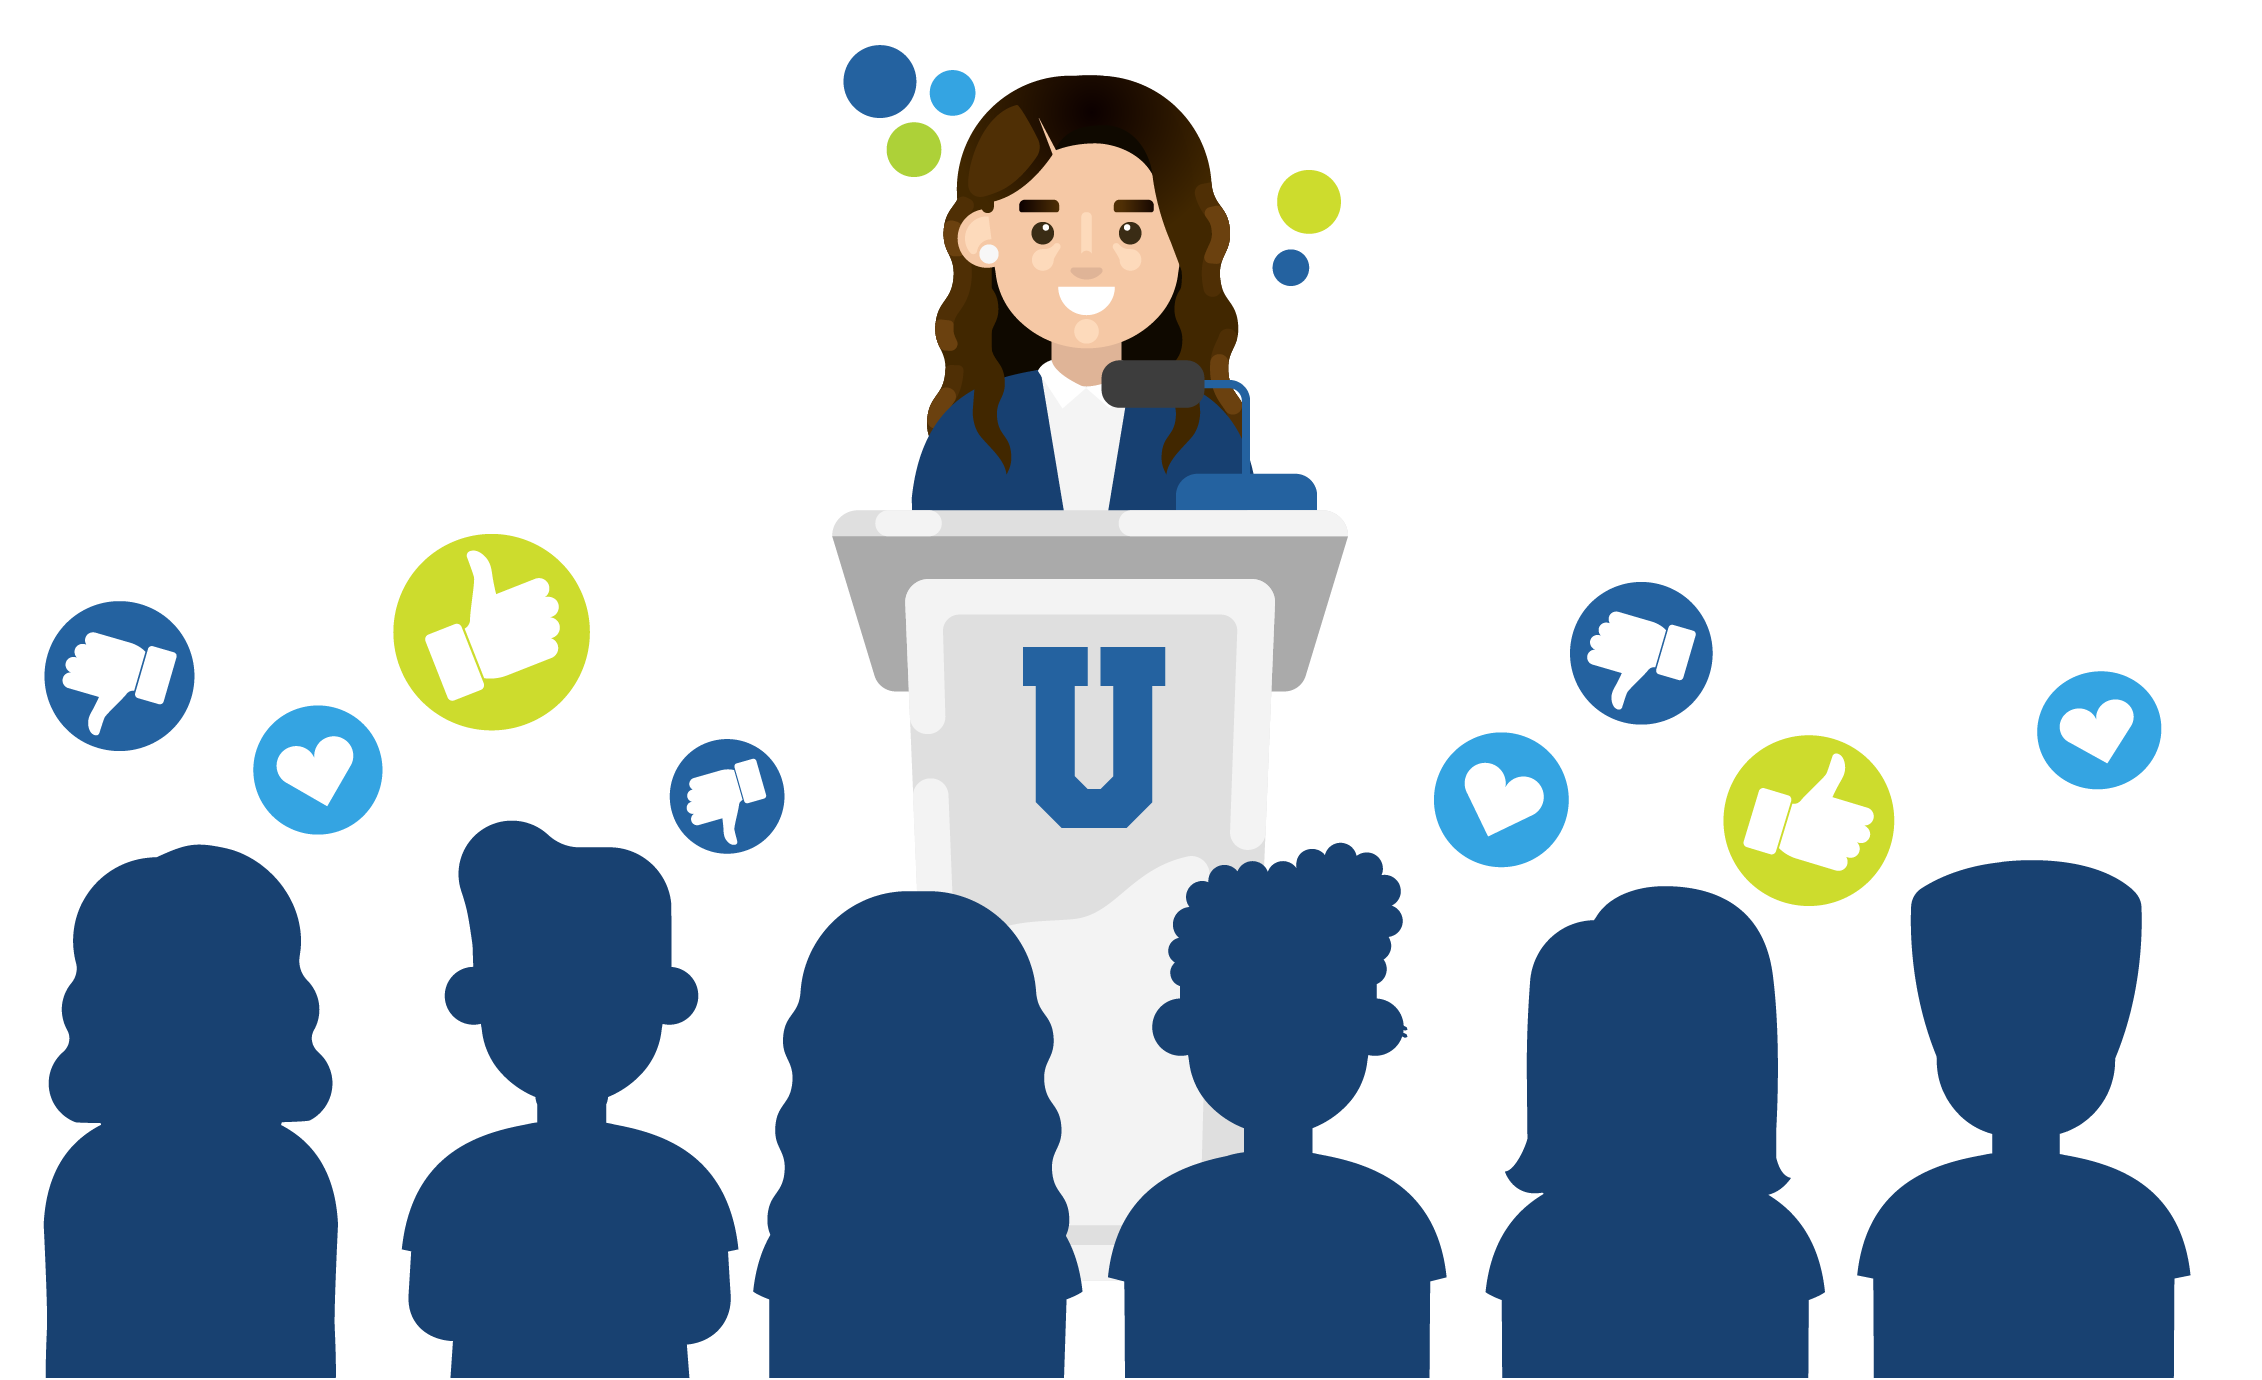 Woman campus executive standing at a podium in front of a student audience with a variety of social media icons: hearts, thumbs up, and thumbs down